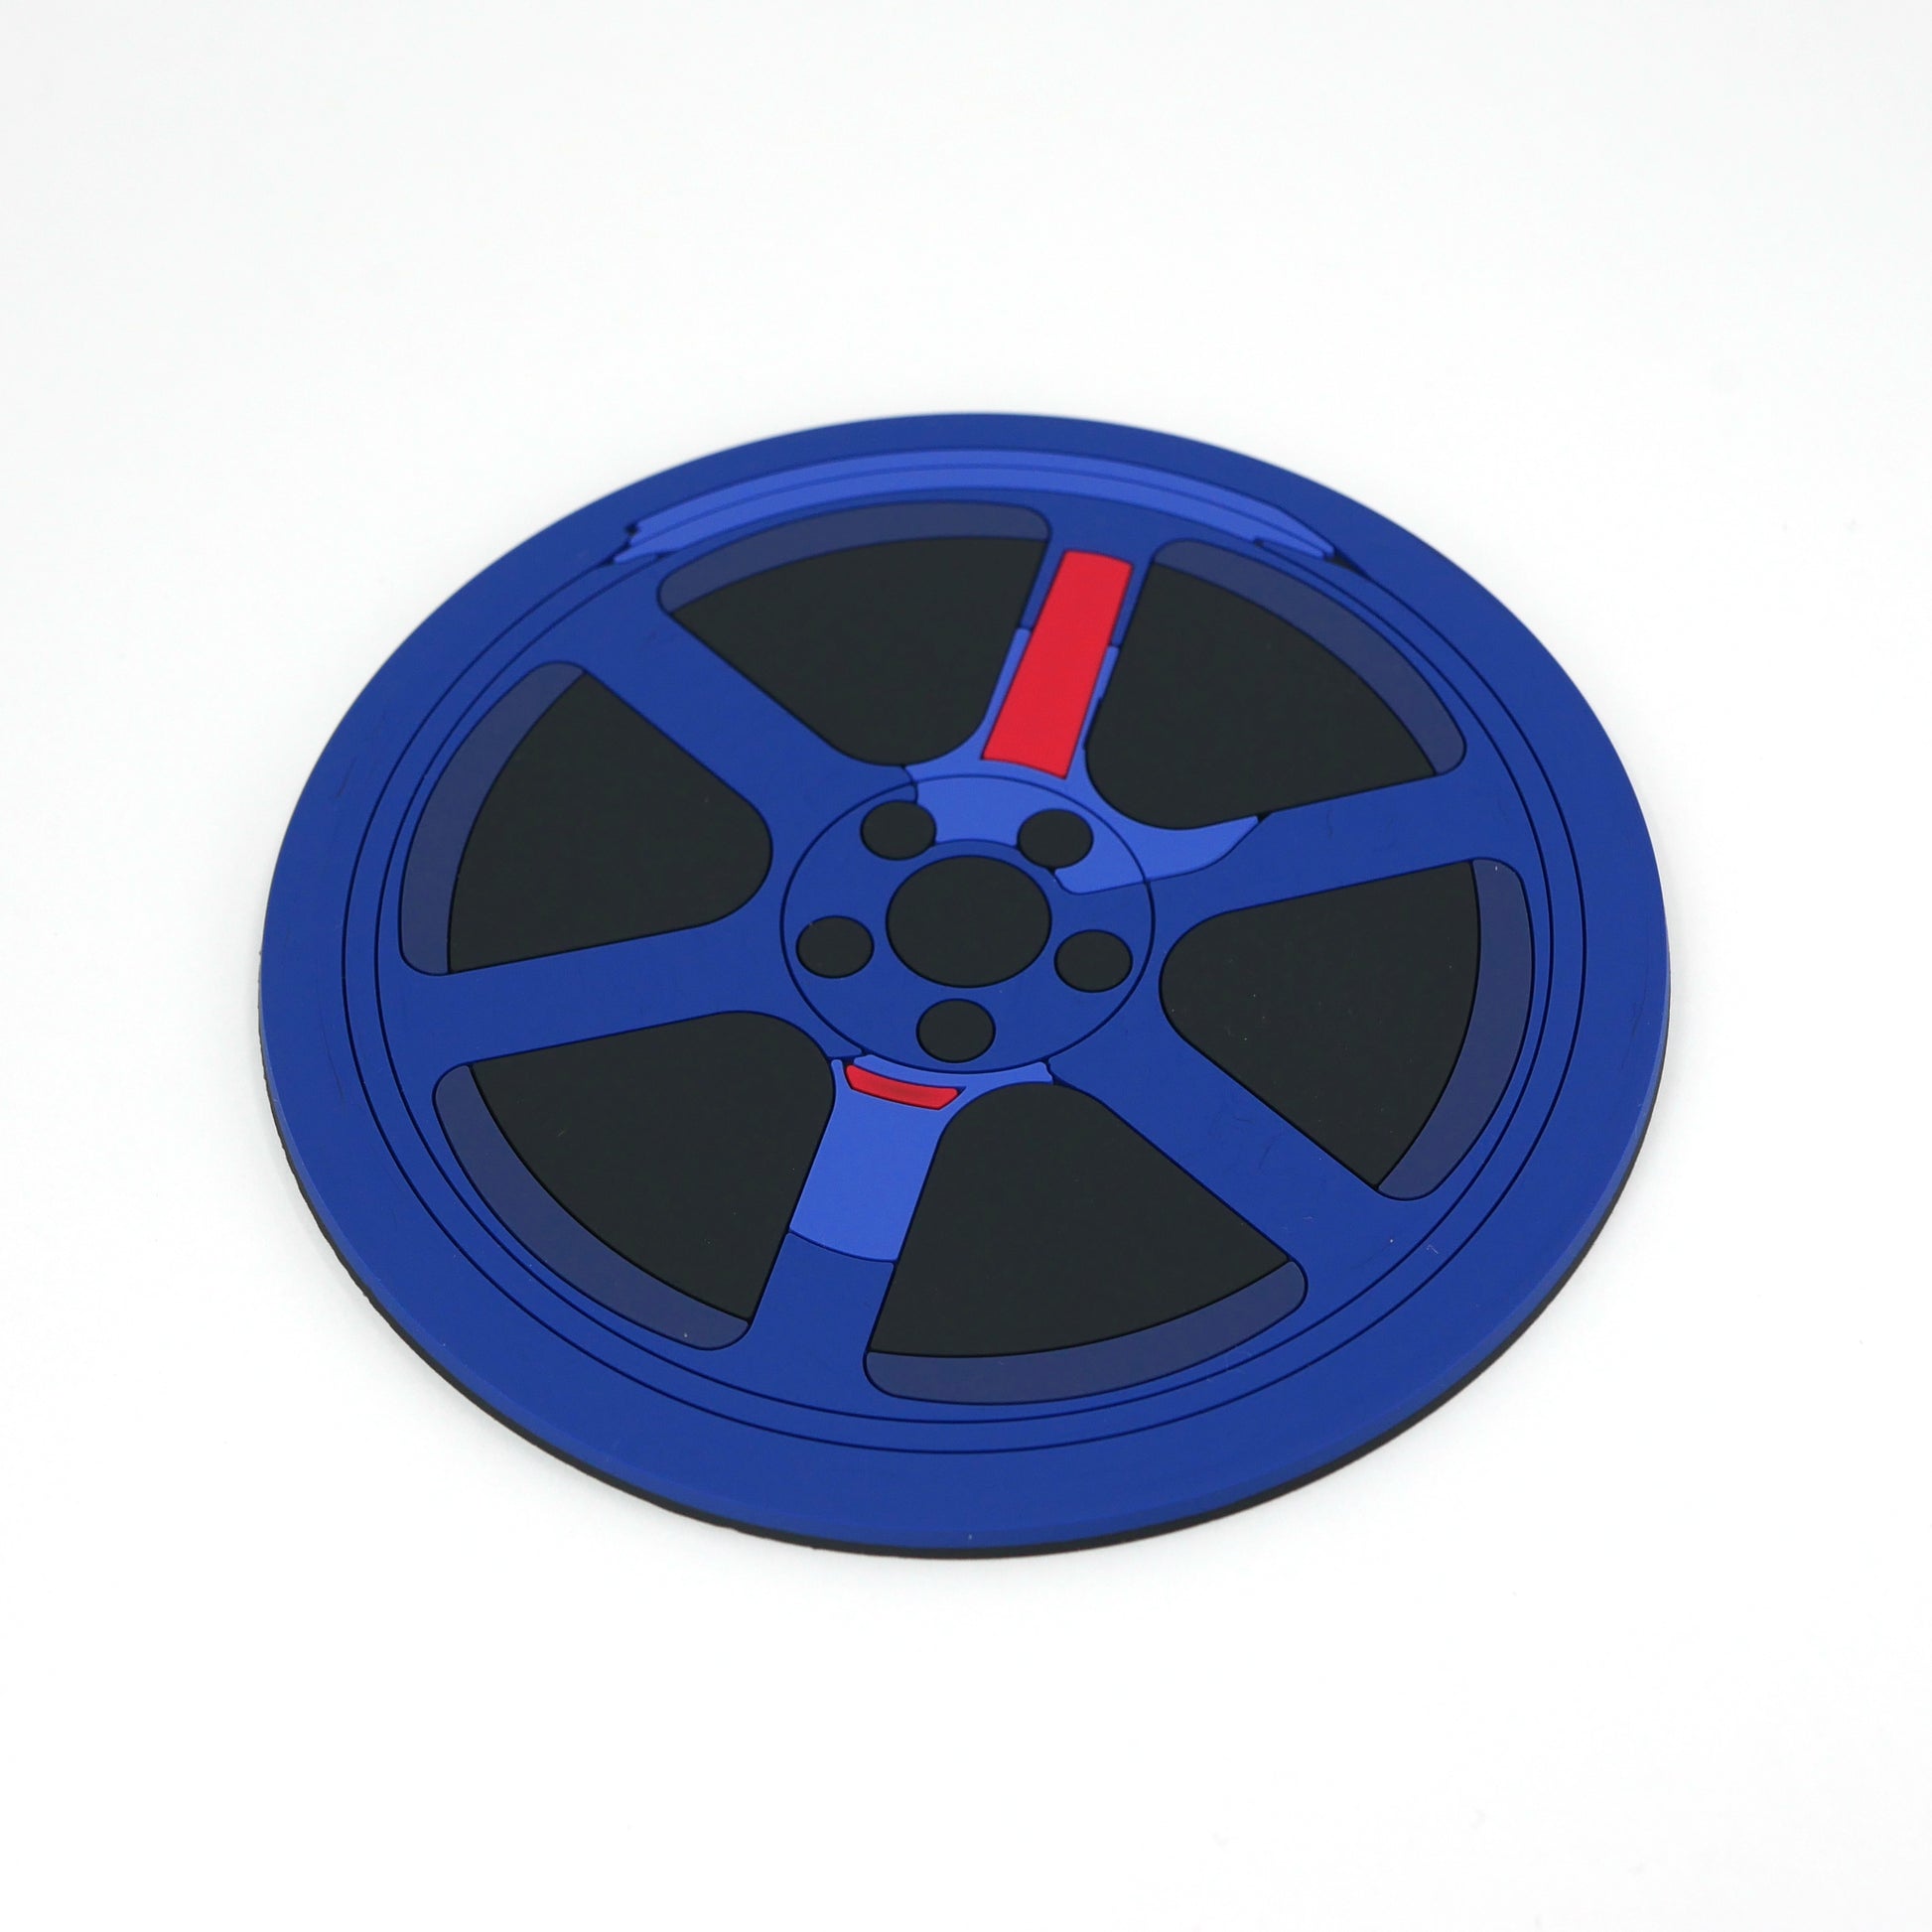 The side of a blue TE wheel PVC rubber coaster.